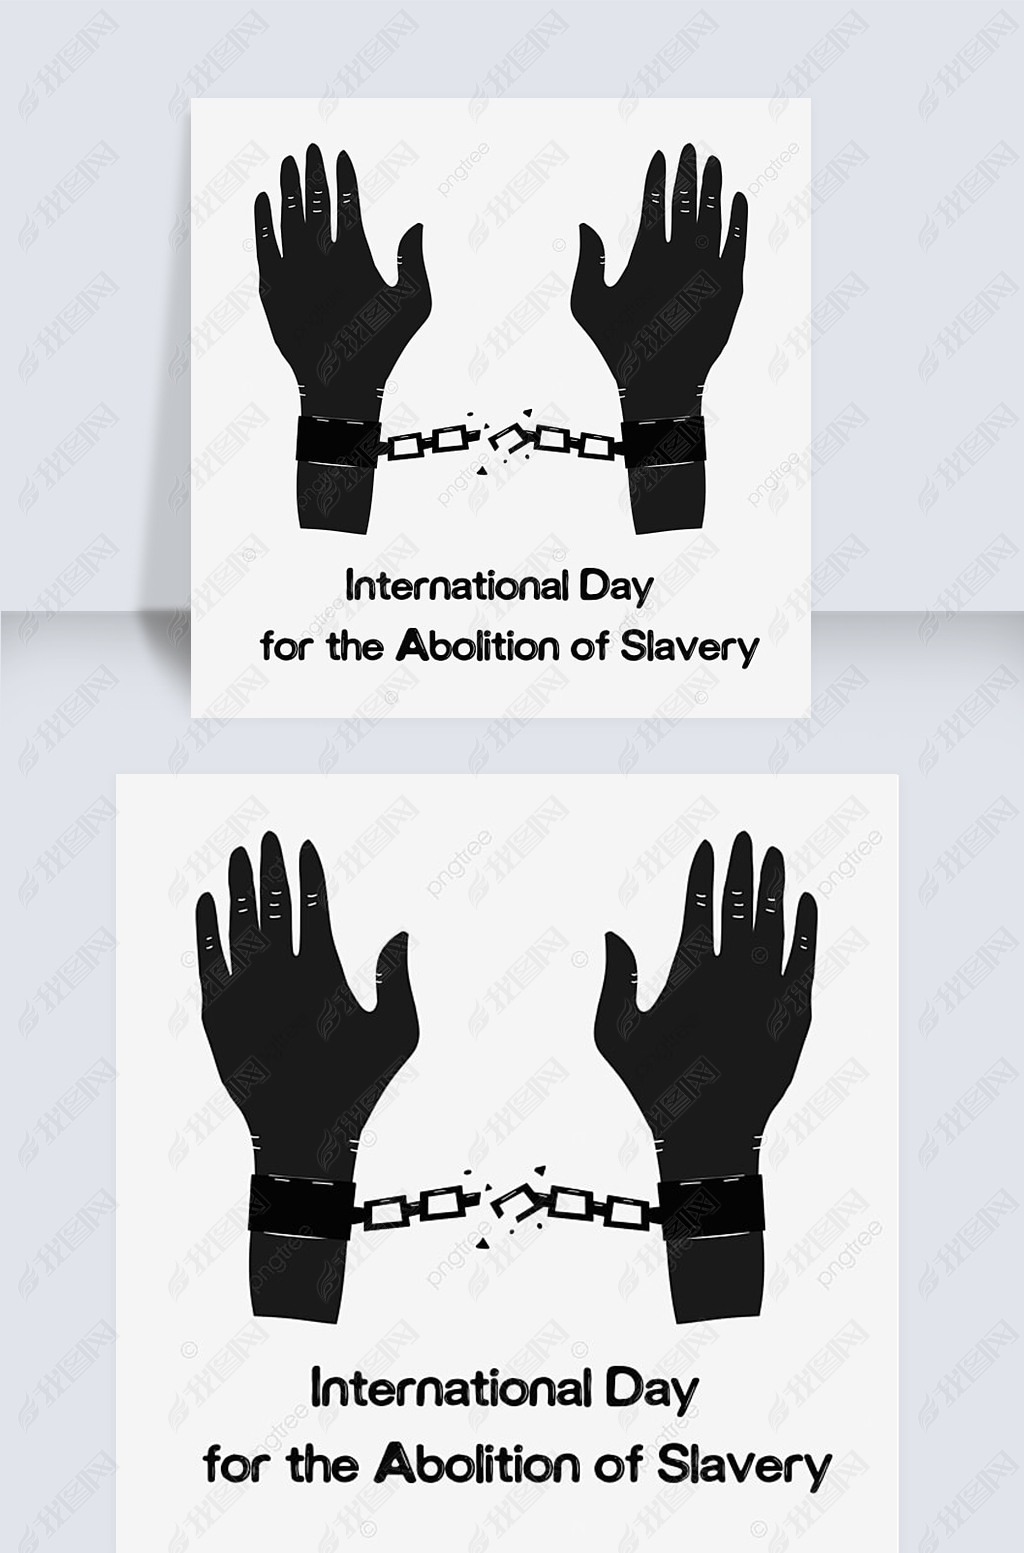 international day for the abolition of sleryֻū˫